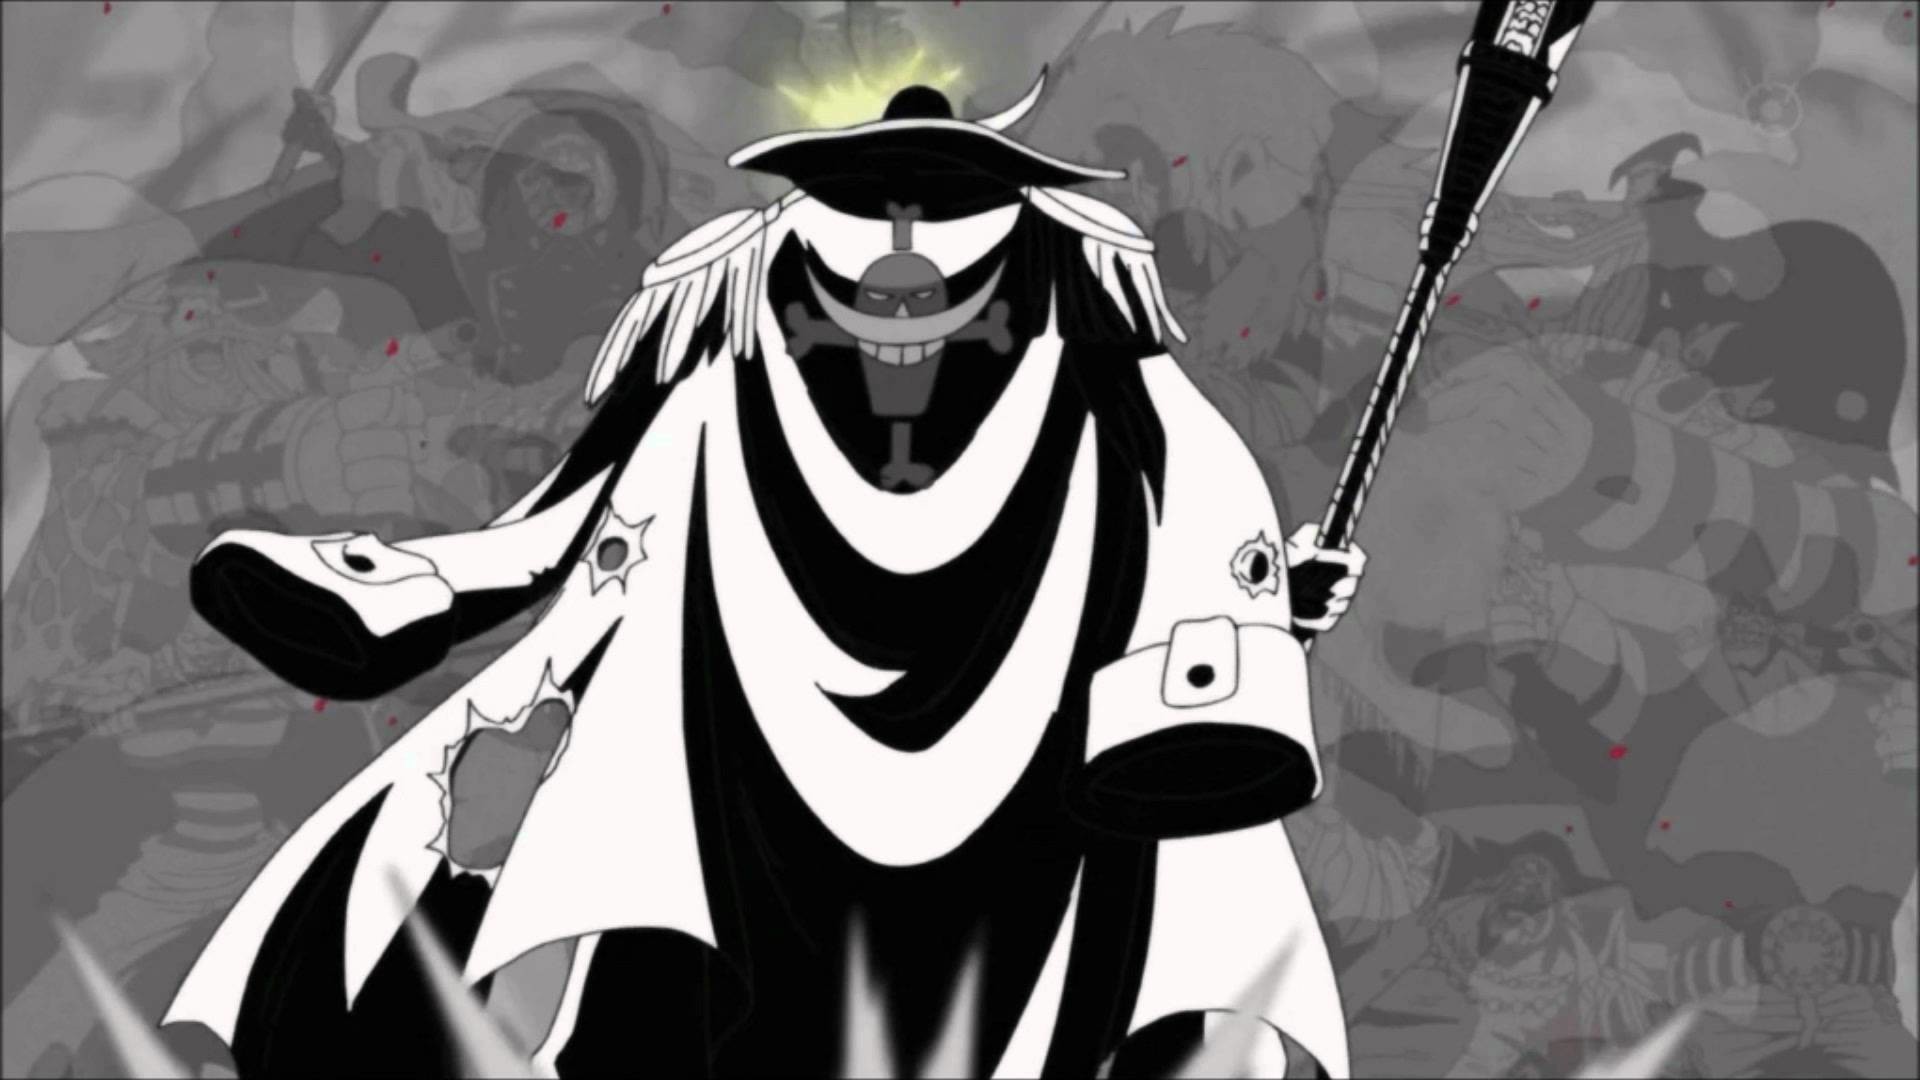 1920x1080 Download Whitebeard wallpapers to your cell phone - anime flag 